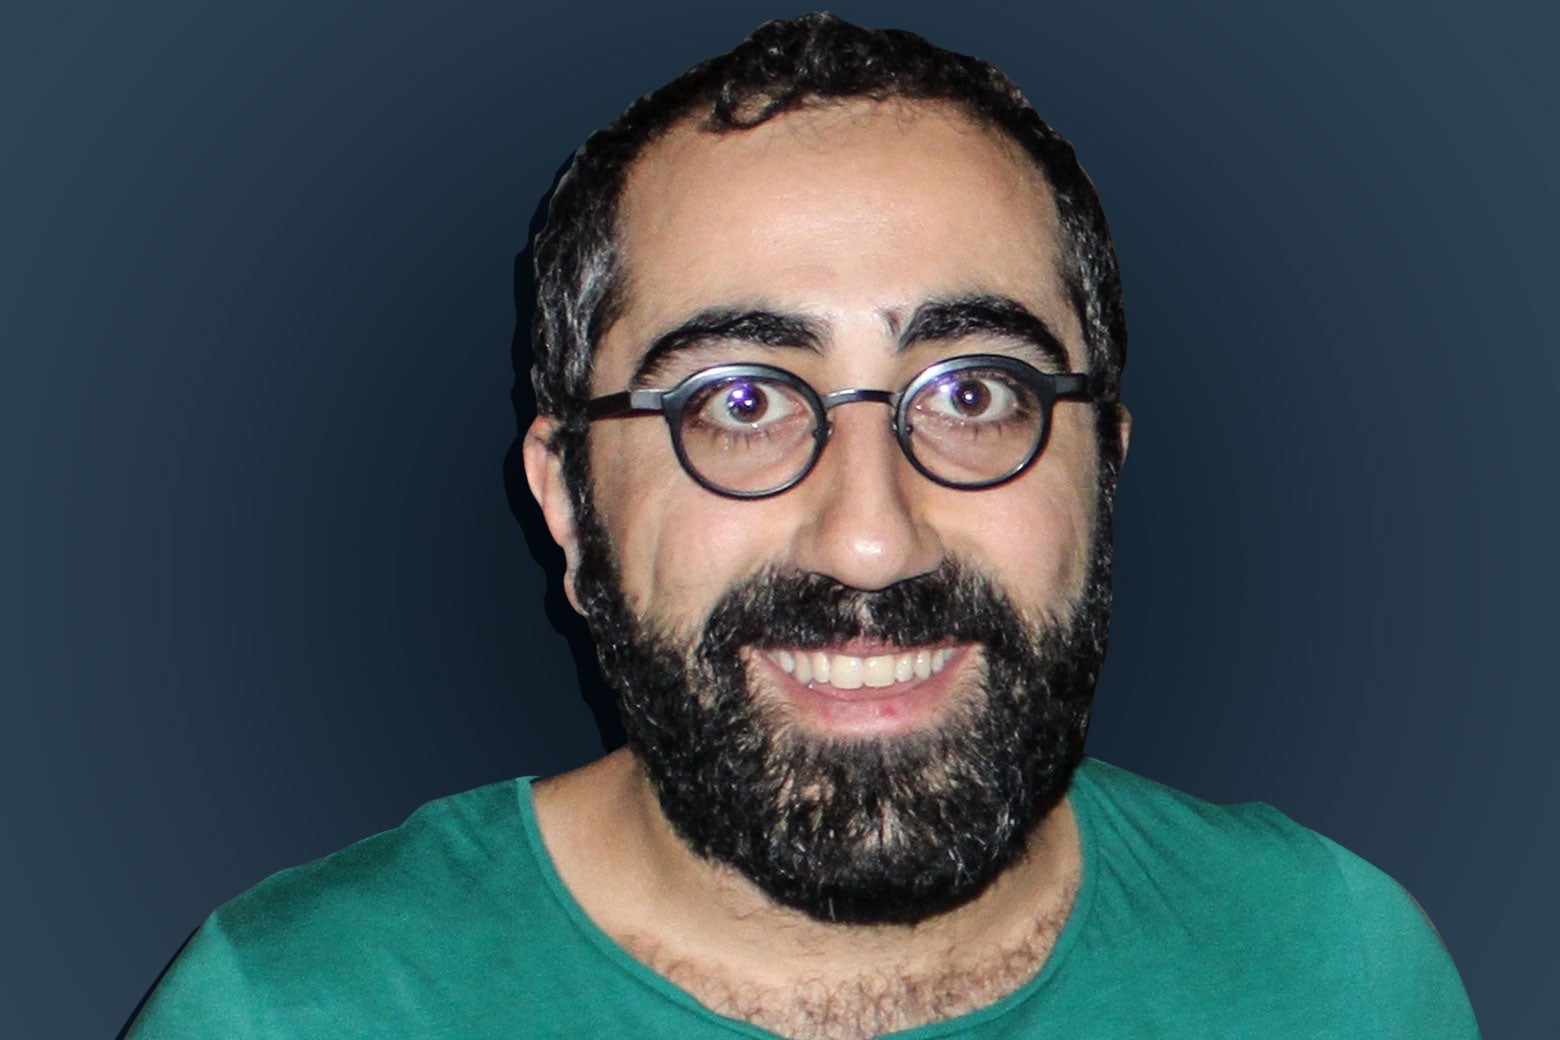 A bearded man in black glasses smiles while wearing a green T-shirt.